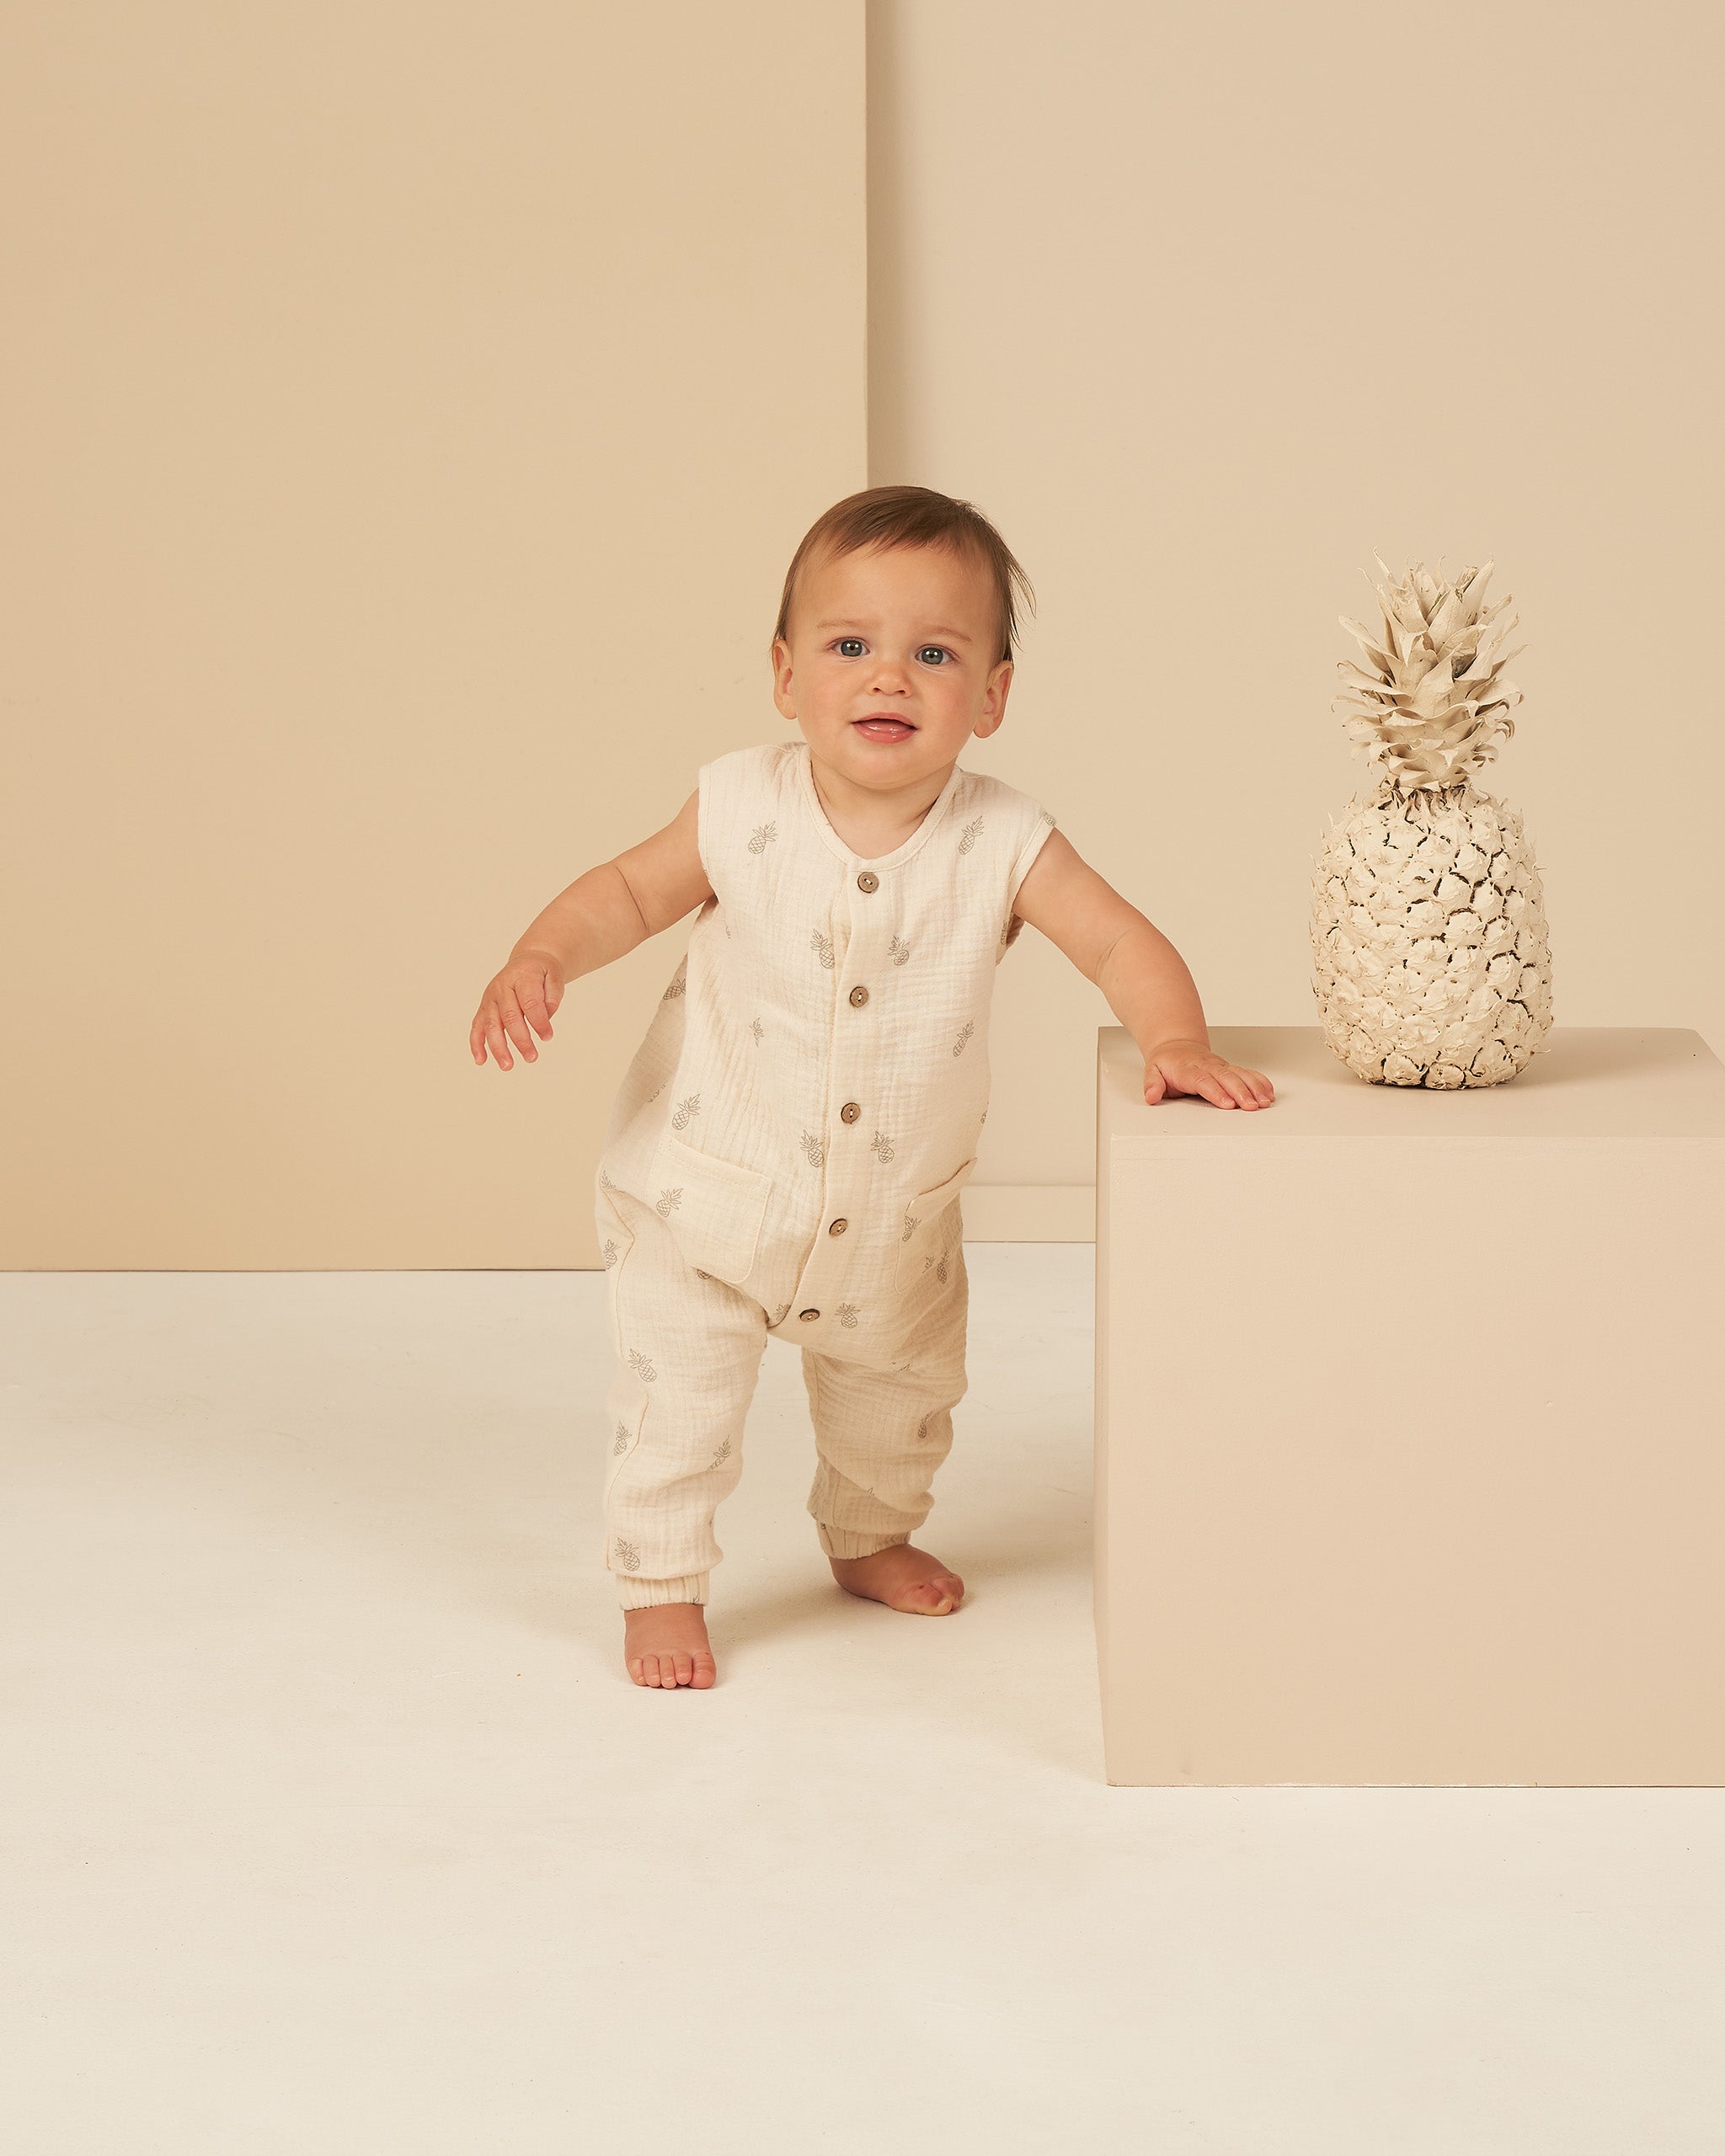 Woven Jumpsuit || Pineapple - Rylee + Cru | Kids Clothes | Trendy Baby Clothes | Modern Infant Outfits |